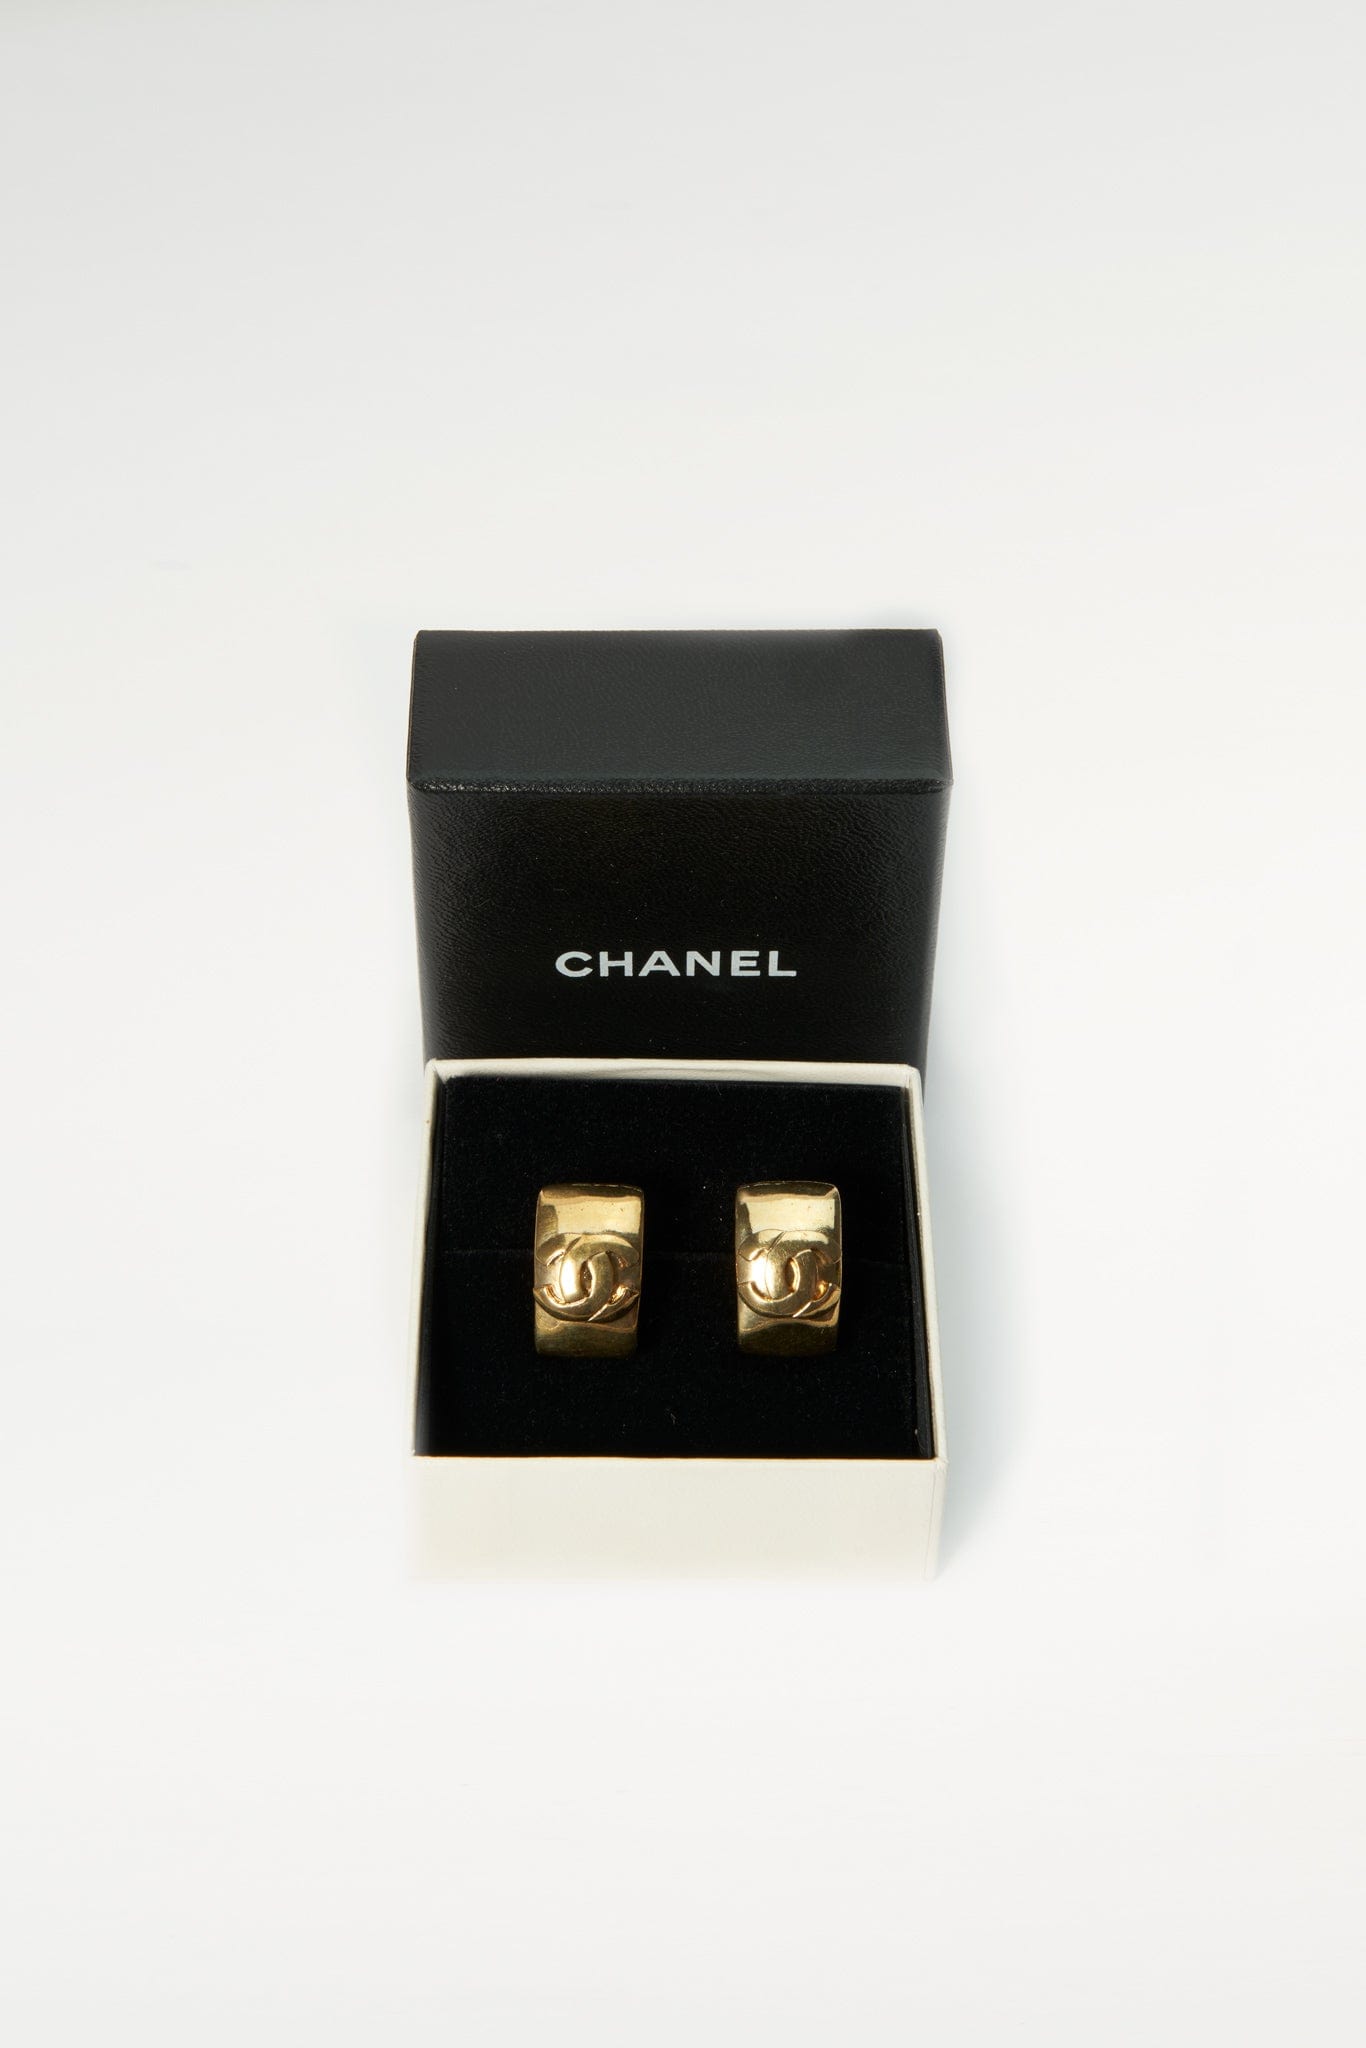 Chanel 2022 Faux Pearl & Strass 'CHA-NEL' Earring Jacket Stud Earrings -  Gold-Plated Stud, Earrings - CHA956185 | The RealReal